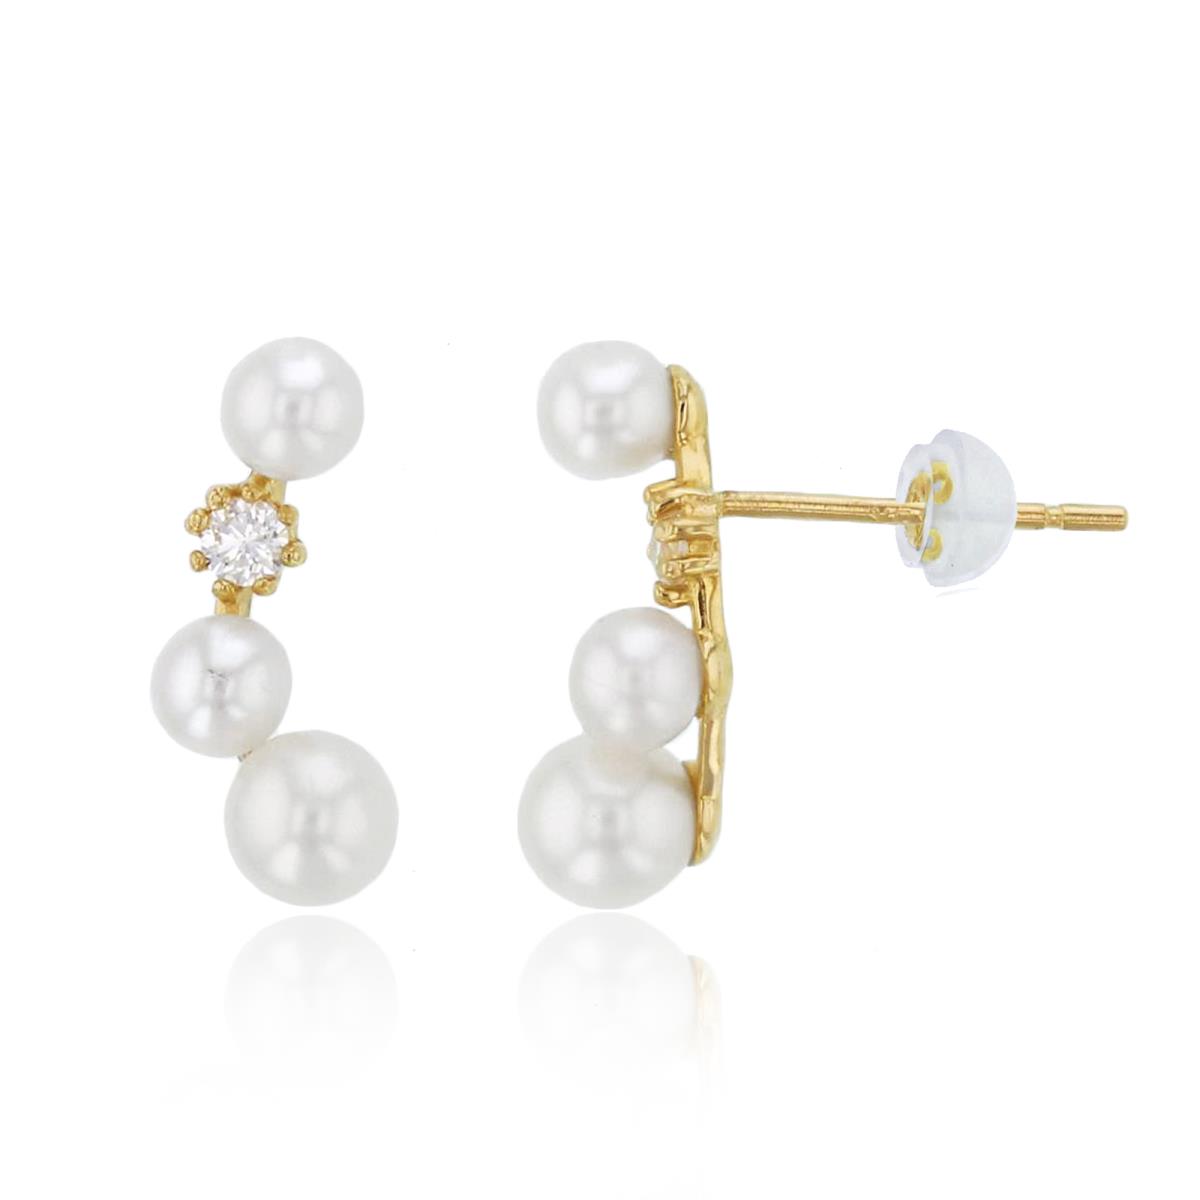 10K Yellow Gold Rnd CZ & 3mm/4mm Fresh Water Pearl Crawl Earrings with Silicon Backs